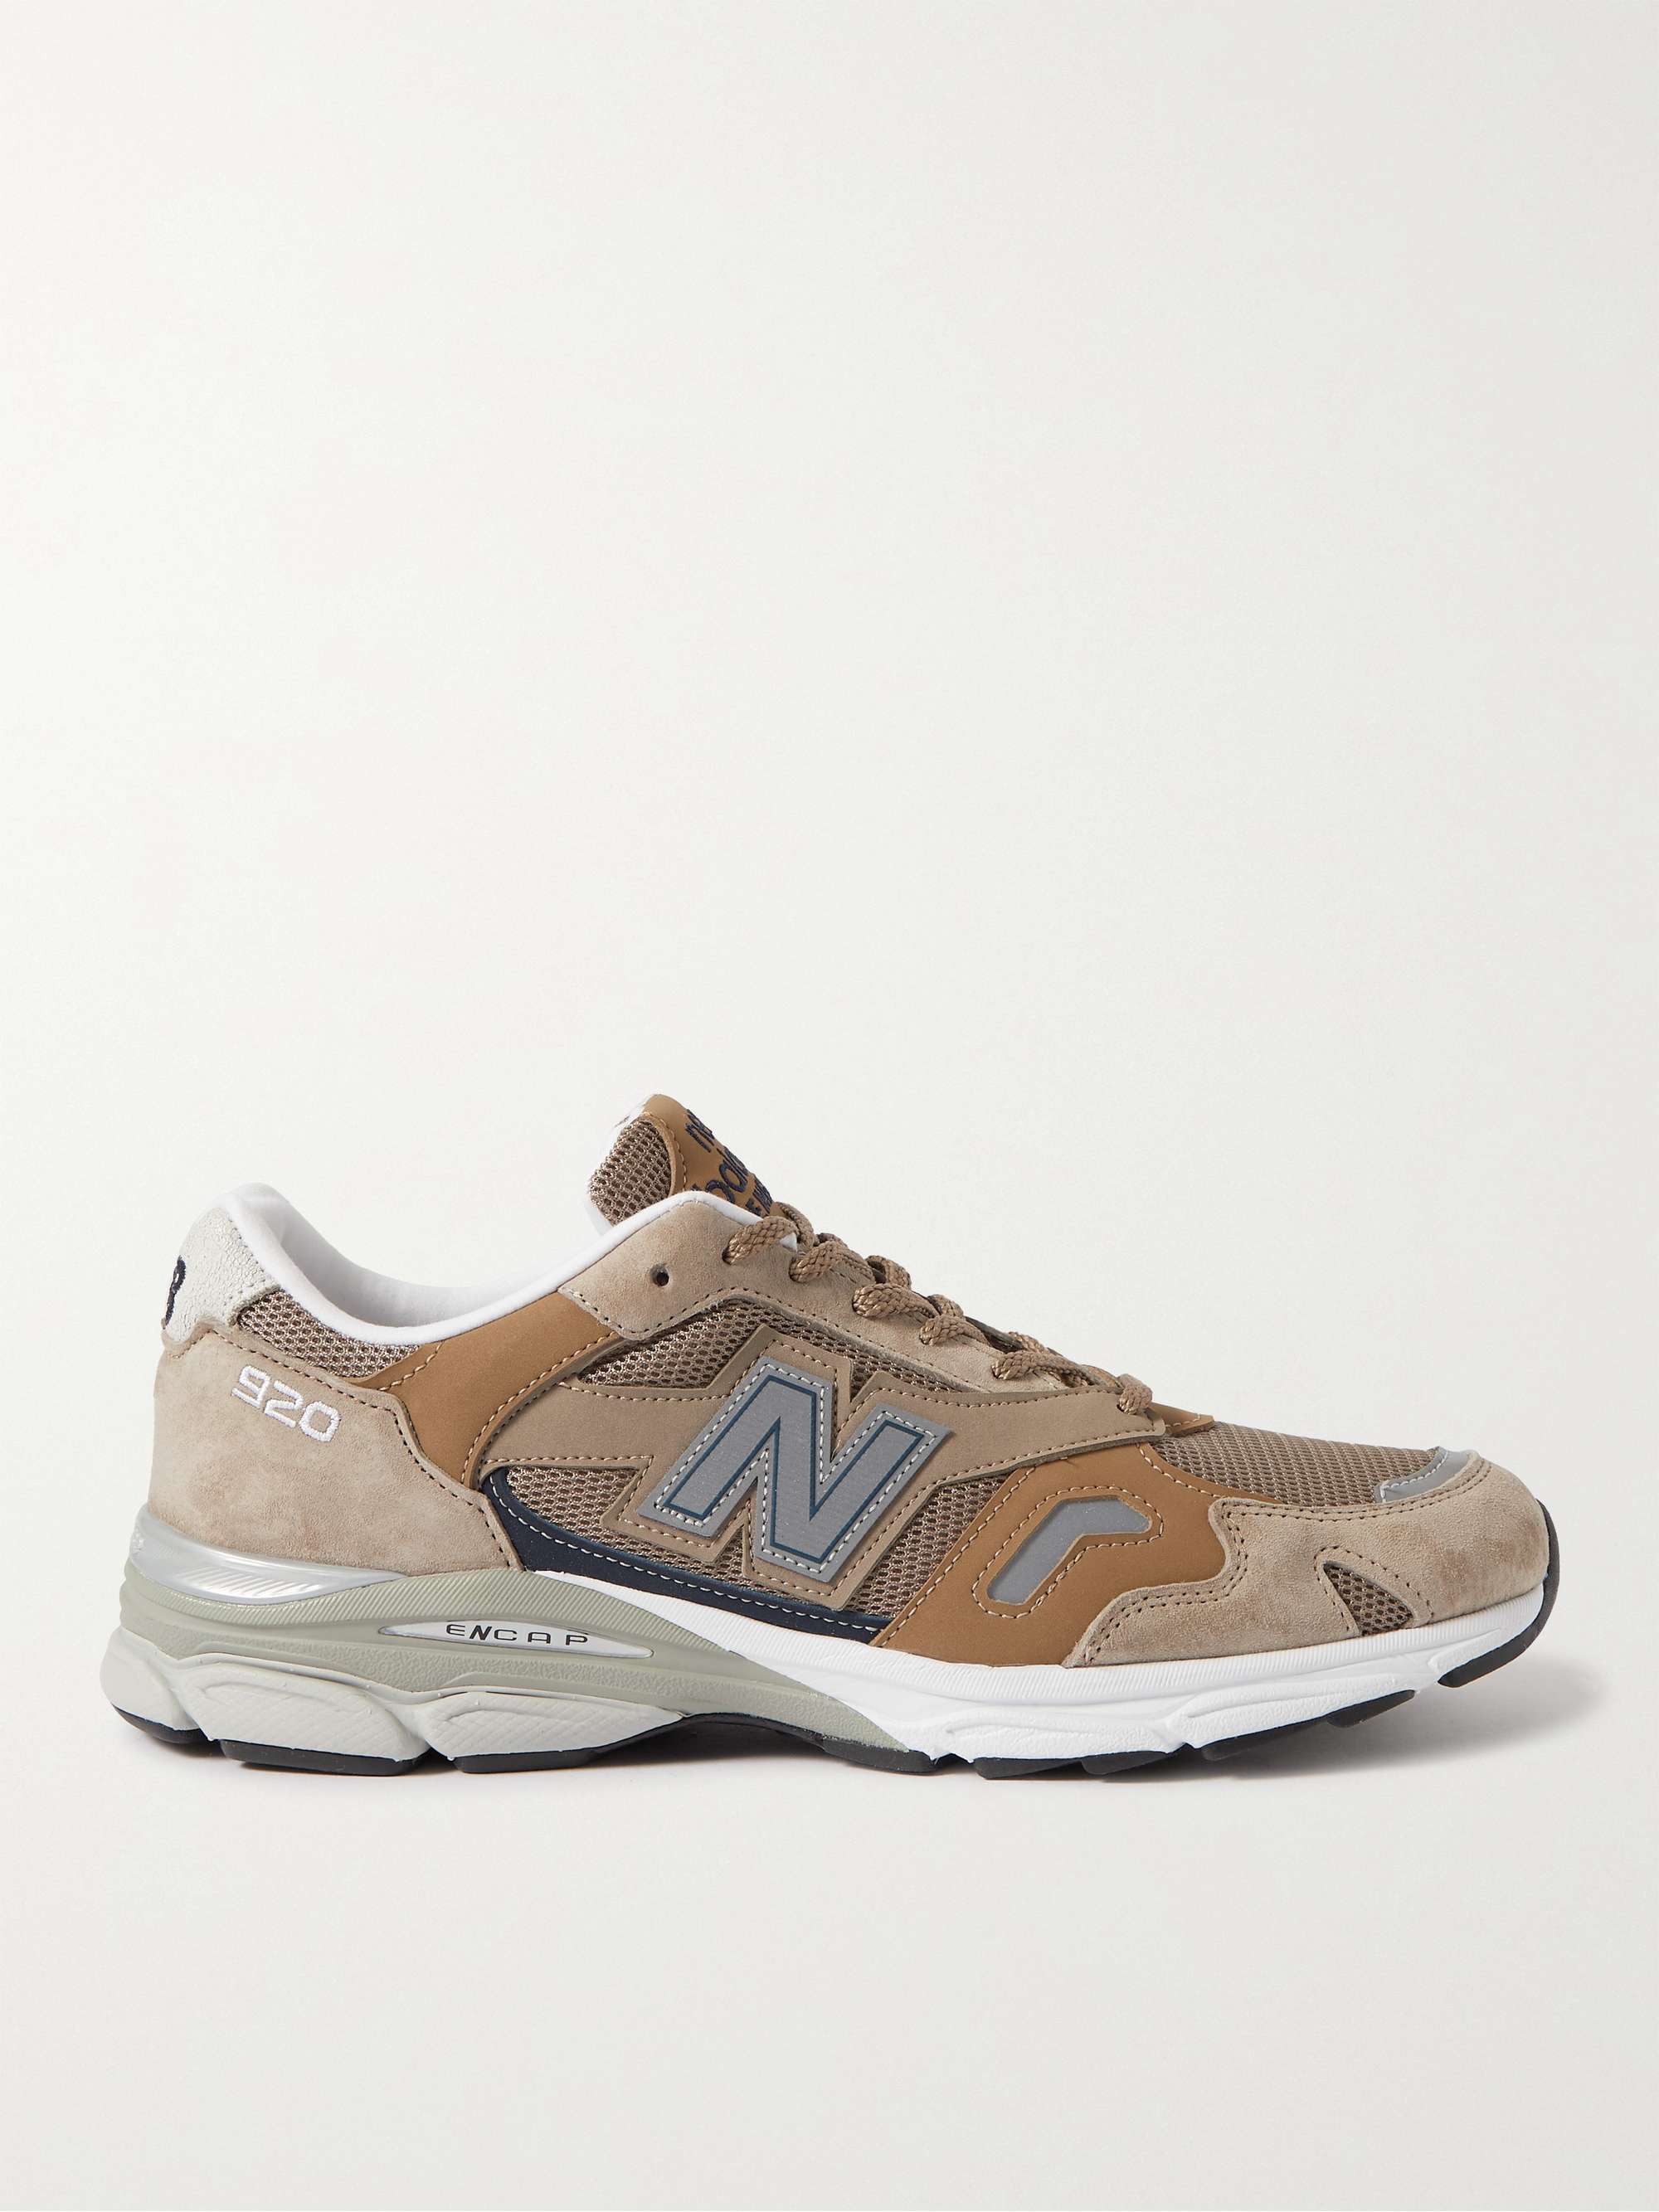 brown suede new balance shoes